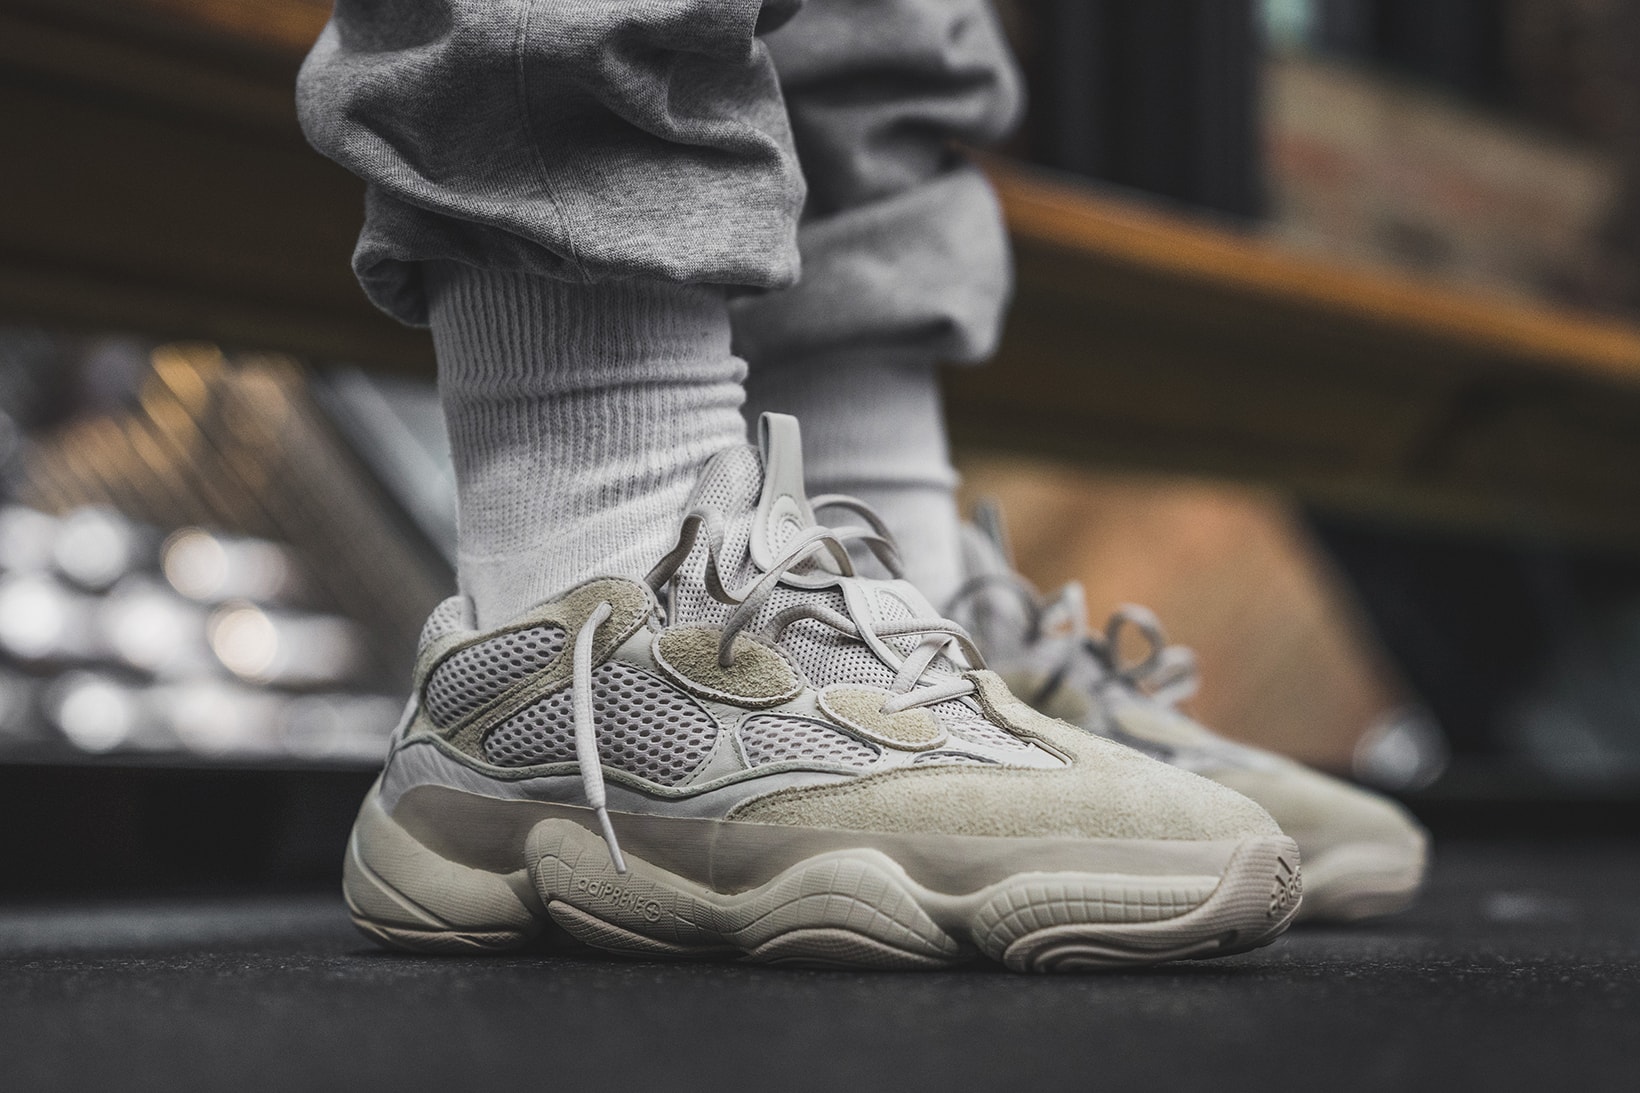 YEEZY 500 Blush Pre Release Date February 16 17 2018 Los Angeles LA NBA All Star Game Weekend 747 Warehouse St adidas adidas Originals Runner Sneakers Drops Info Kanye West Yeezy Mafia